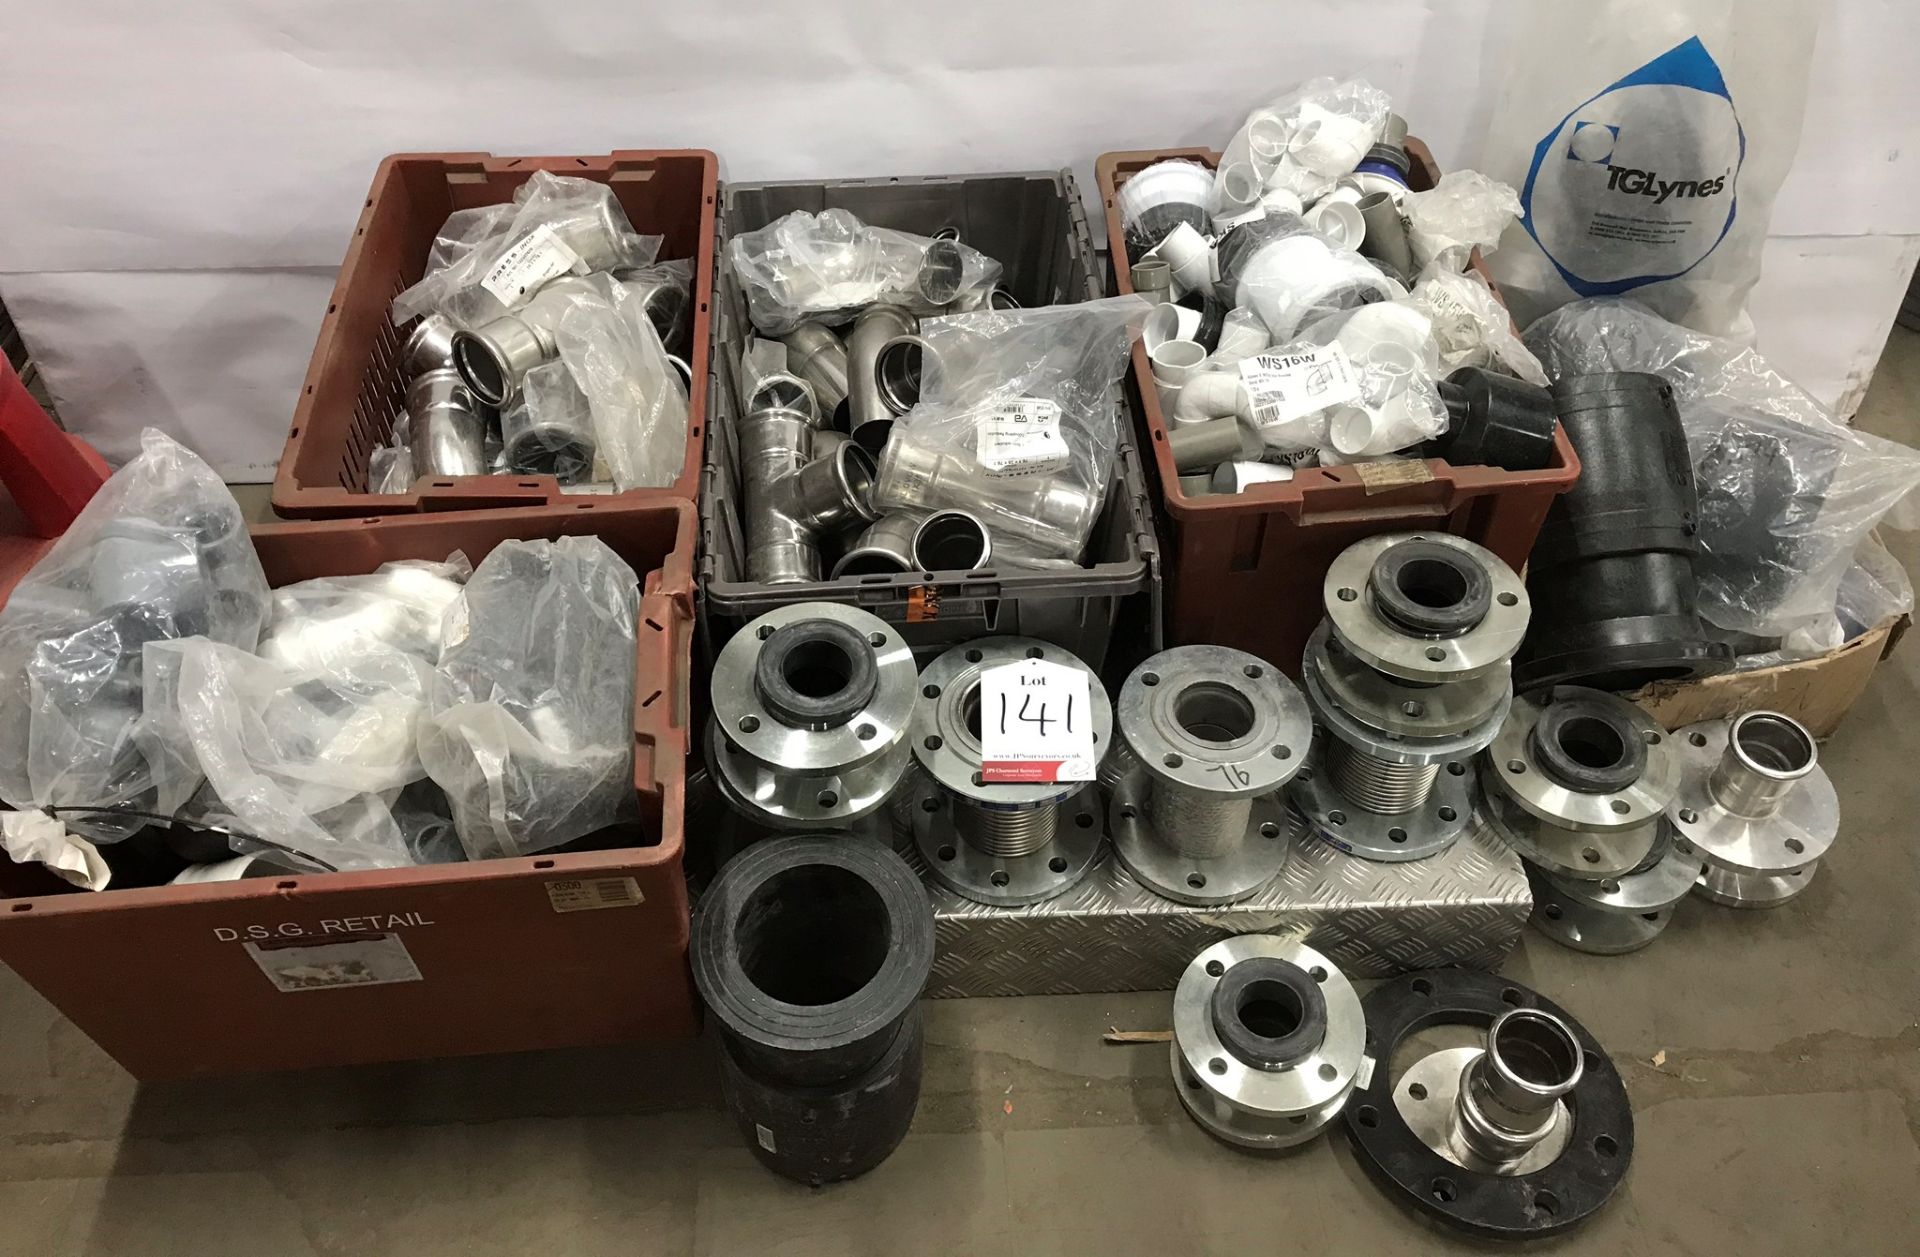 Quantity of various metal & PVC flanges, tees, elbows and fittings as pictured